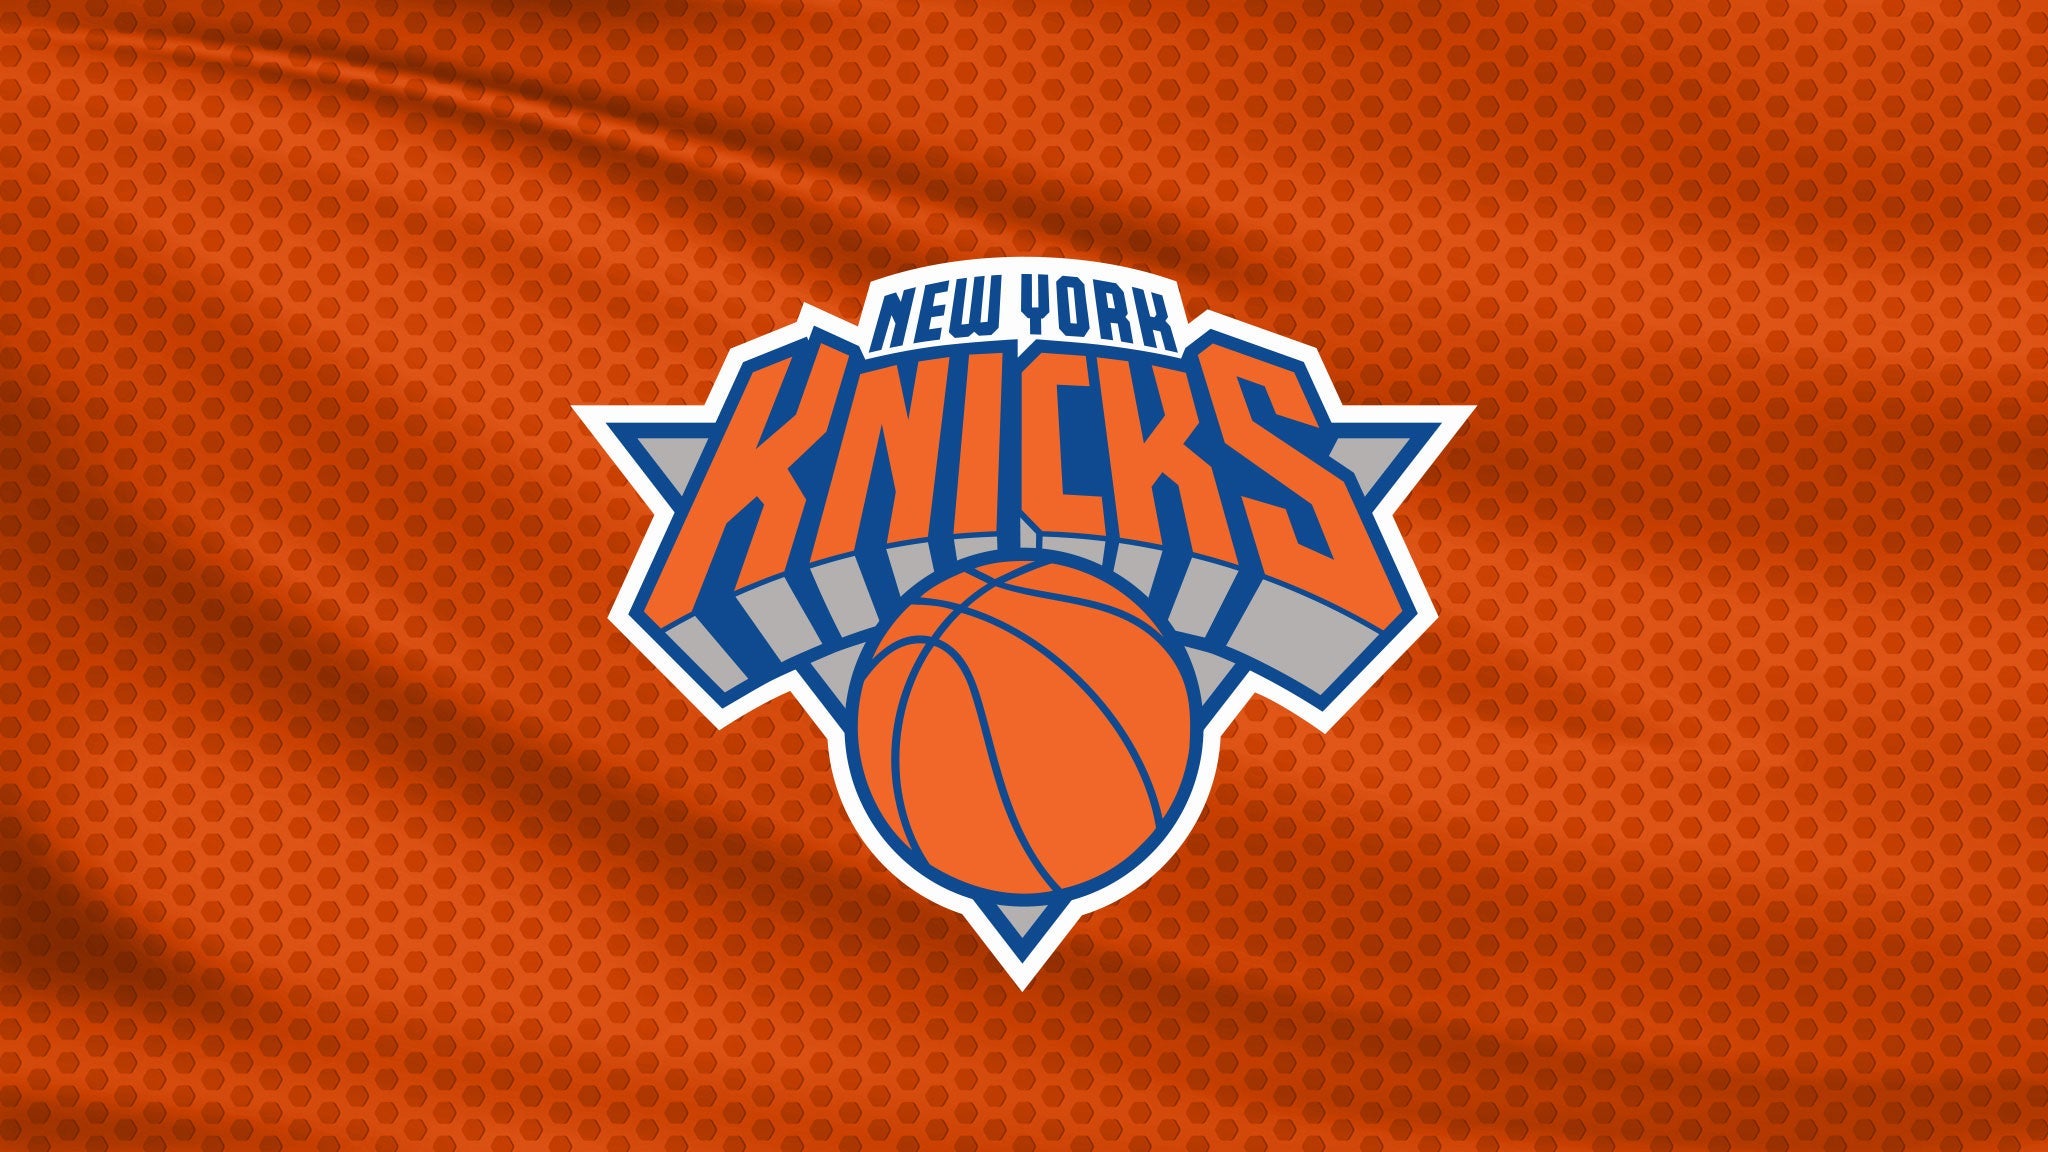 New York Knicks Game 6 Watch Party v. Indiana Pacers